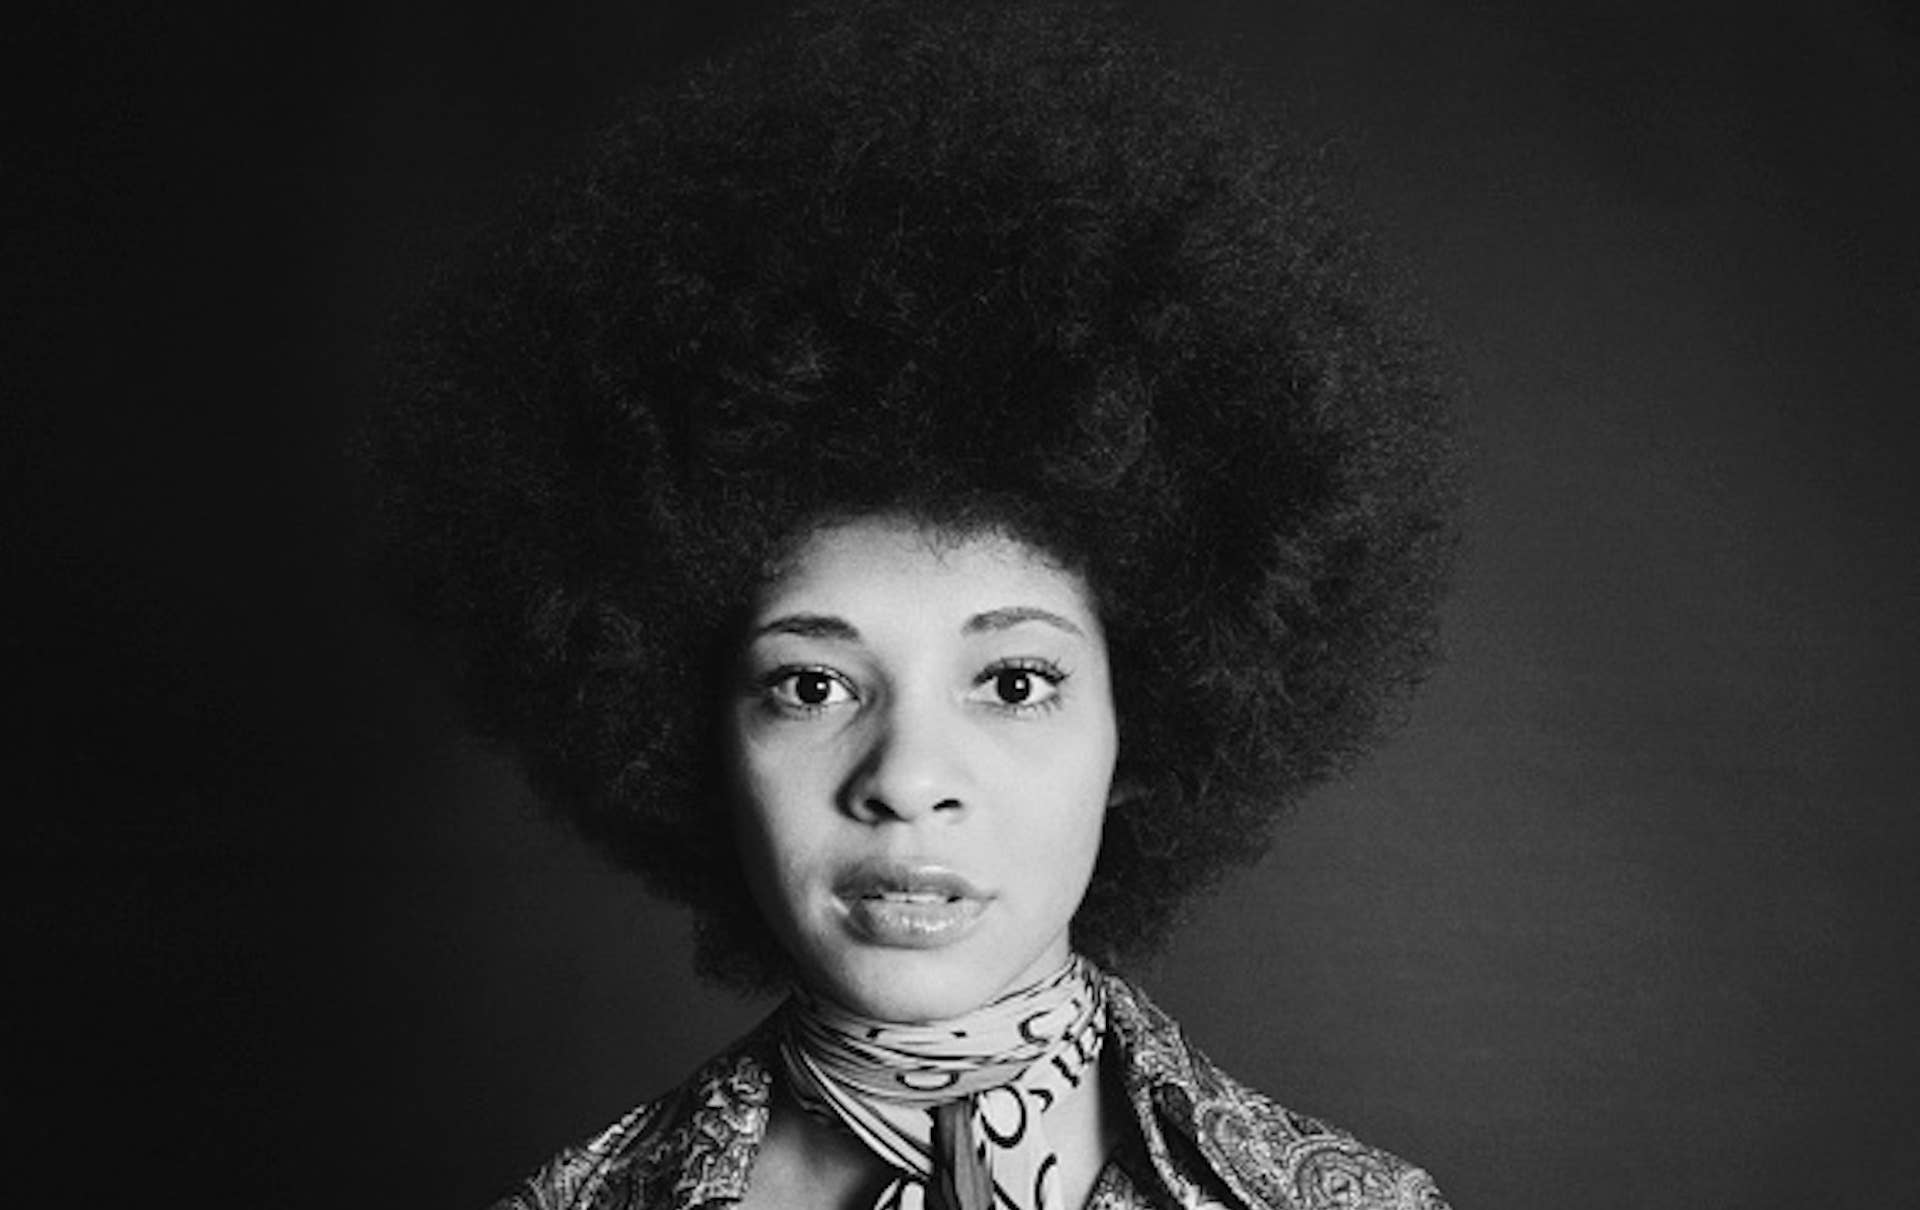 Iconic funk singer Betty Davis has died at 77